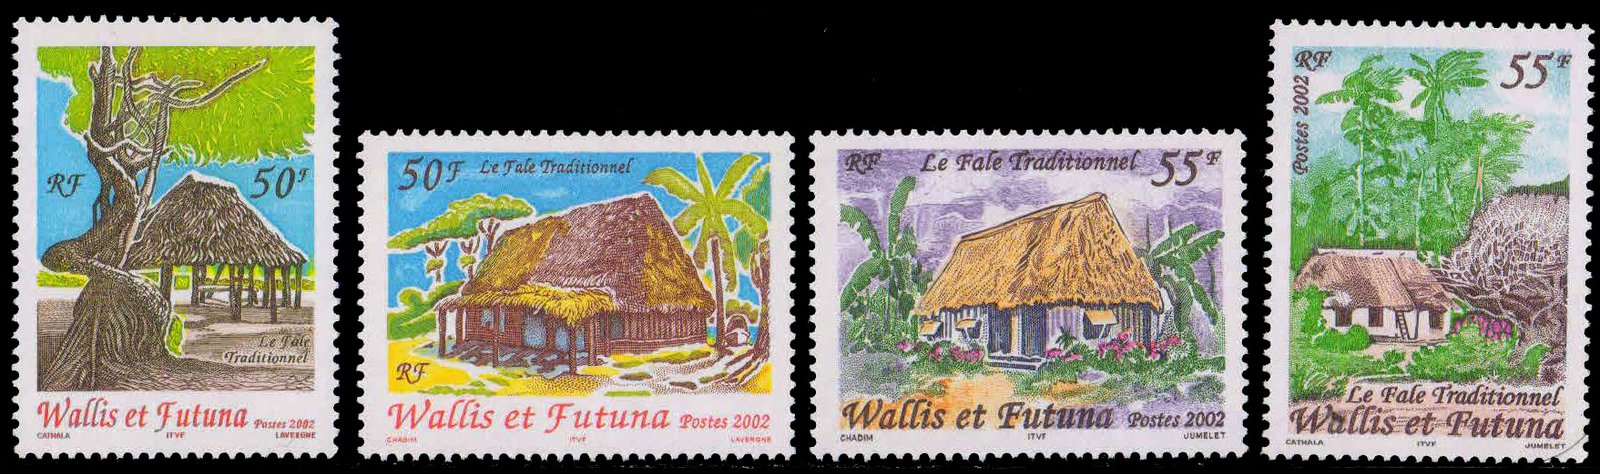 WALLIS & FUTUNA ISLANDS 2002-Traditional Thatched House, Set of 4, MNH, S.G. 800-03-Cat £ 7.50